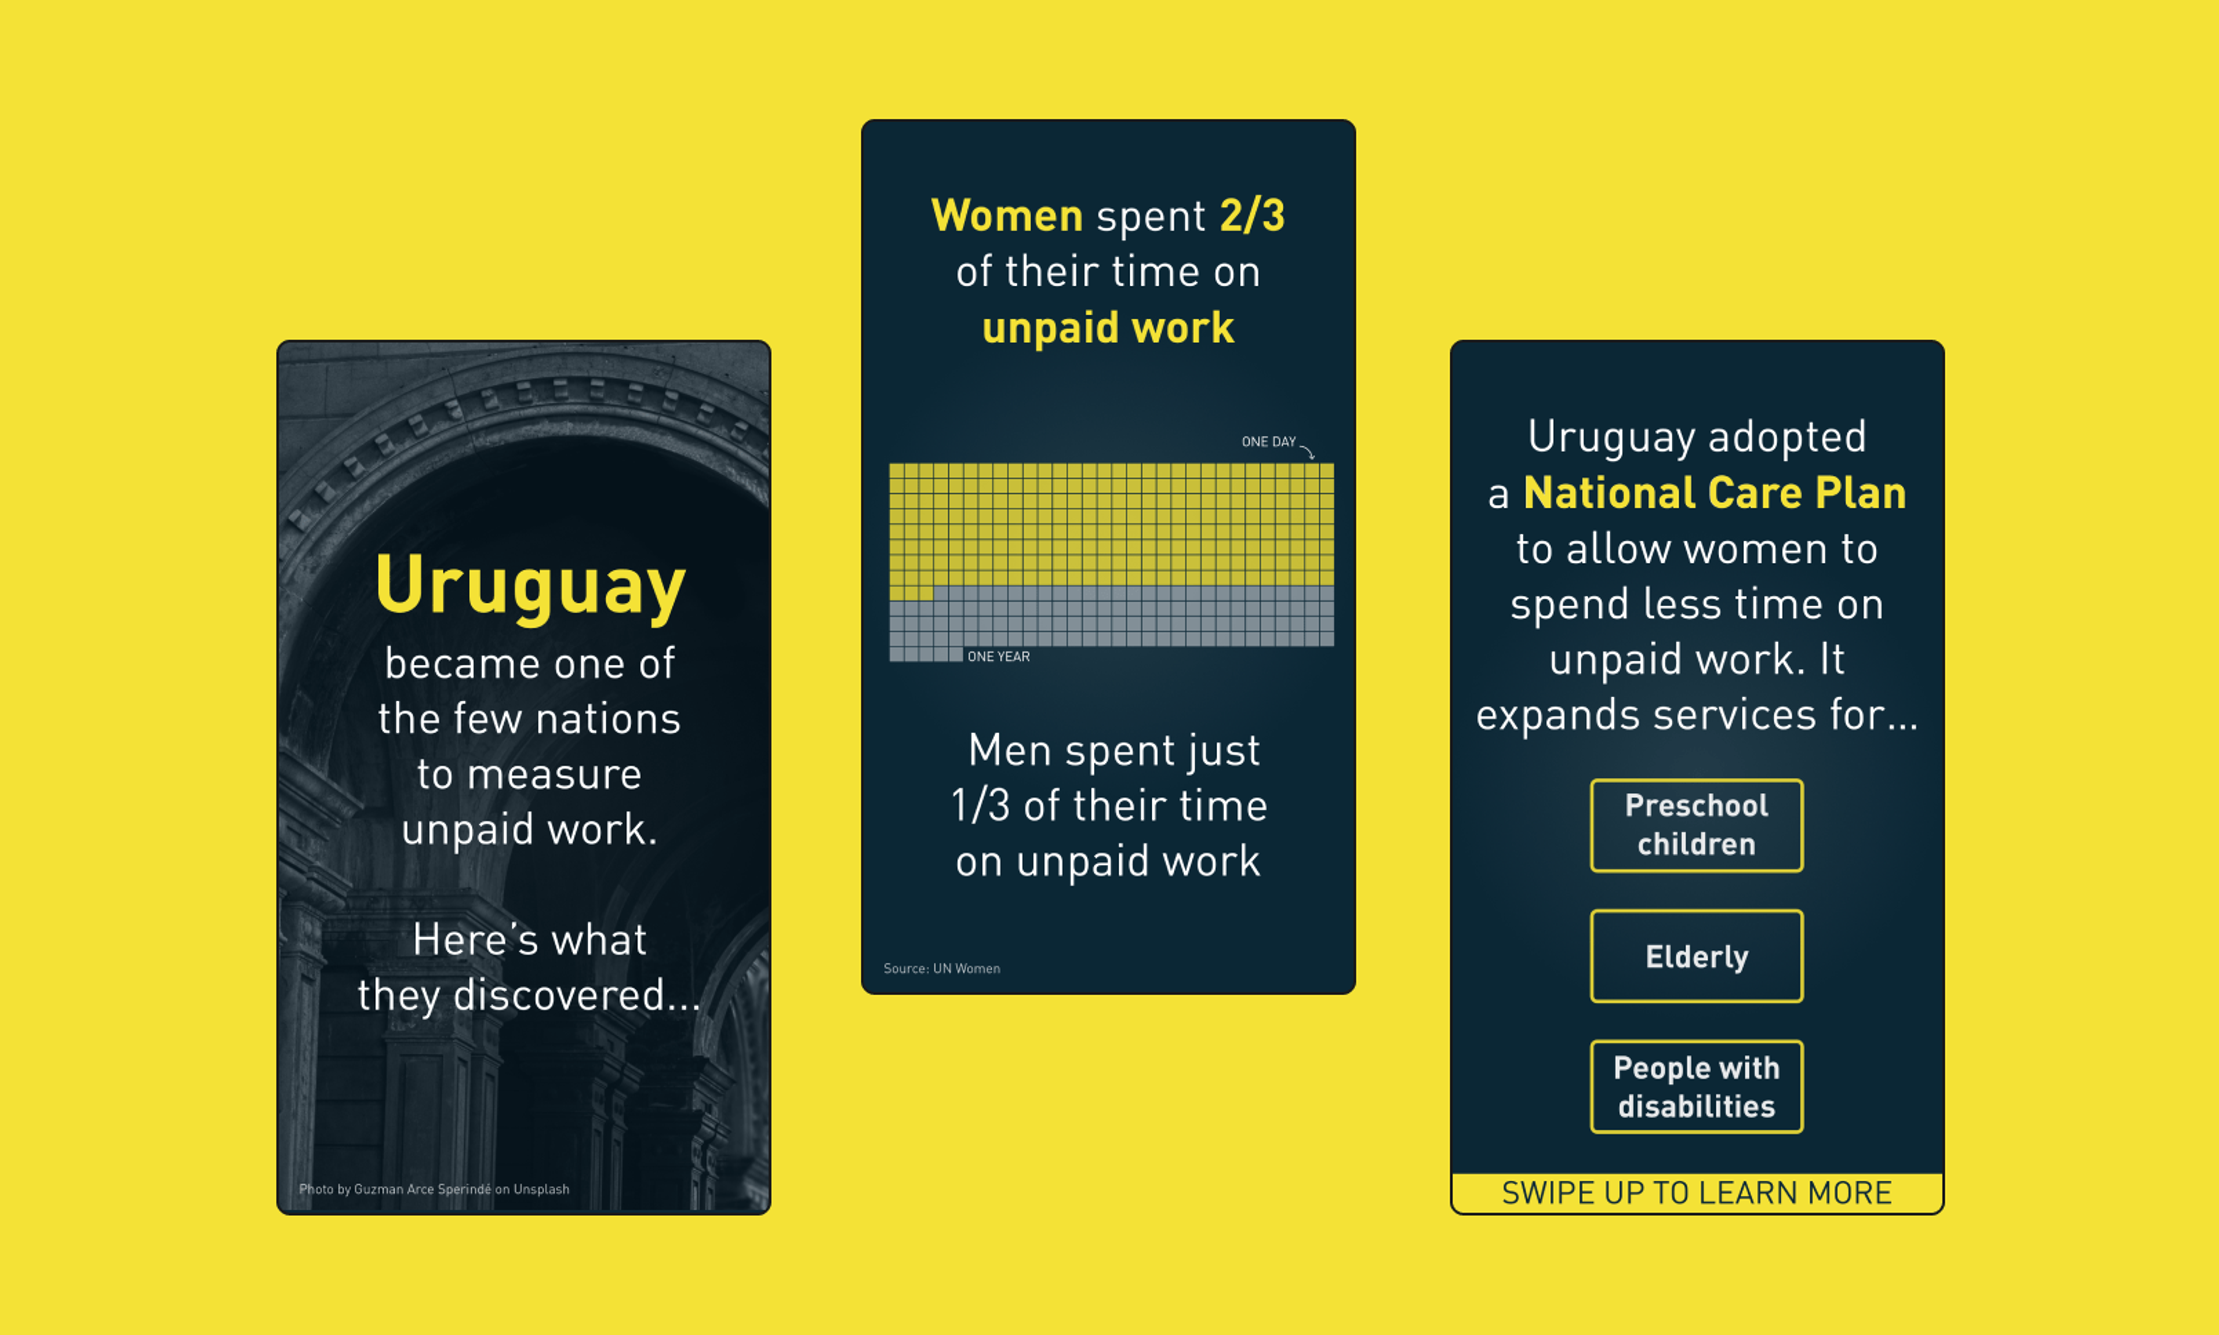 Three social media images in mobile portrait mode created to support Women Deliver's 2019 conference. The first is a title card, the second a data visualization comparing how much unpaid work men and women do in Uruguay and an explanation of the country's National Care Plan.